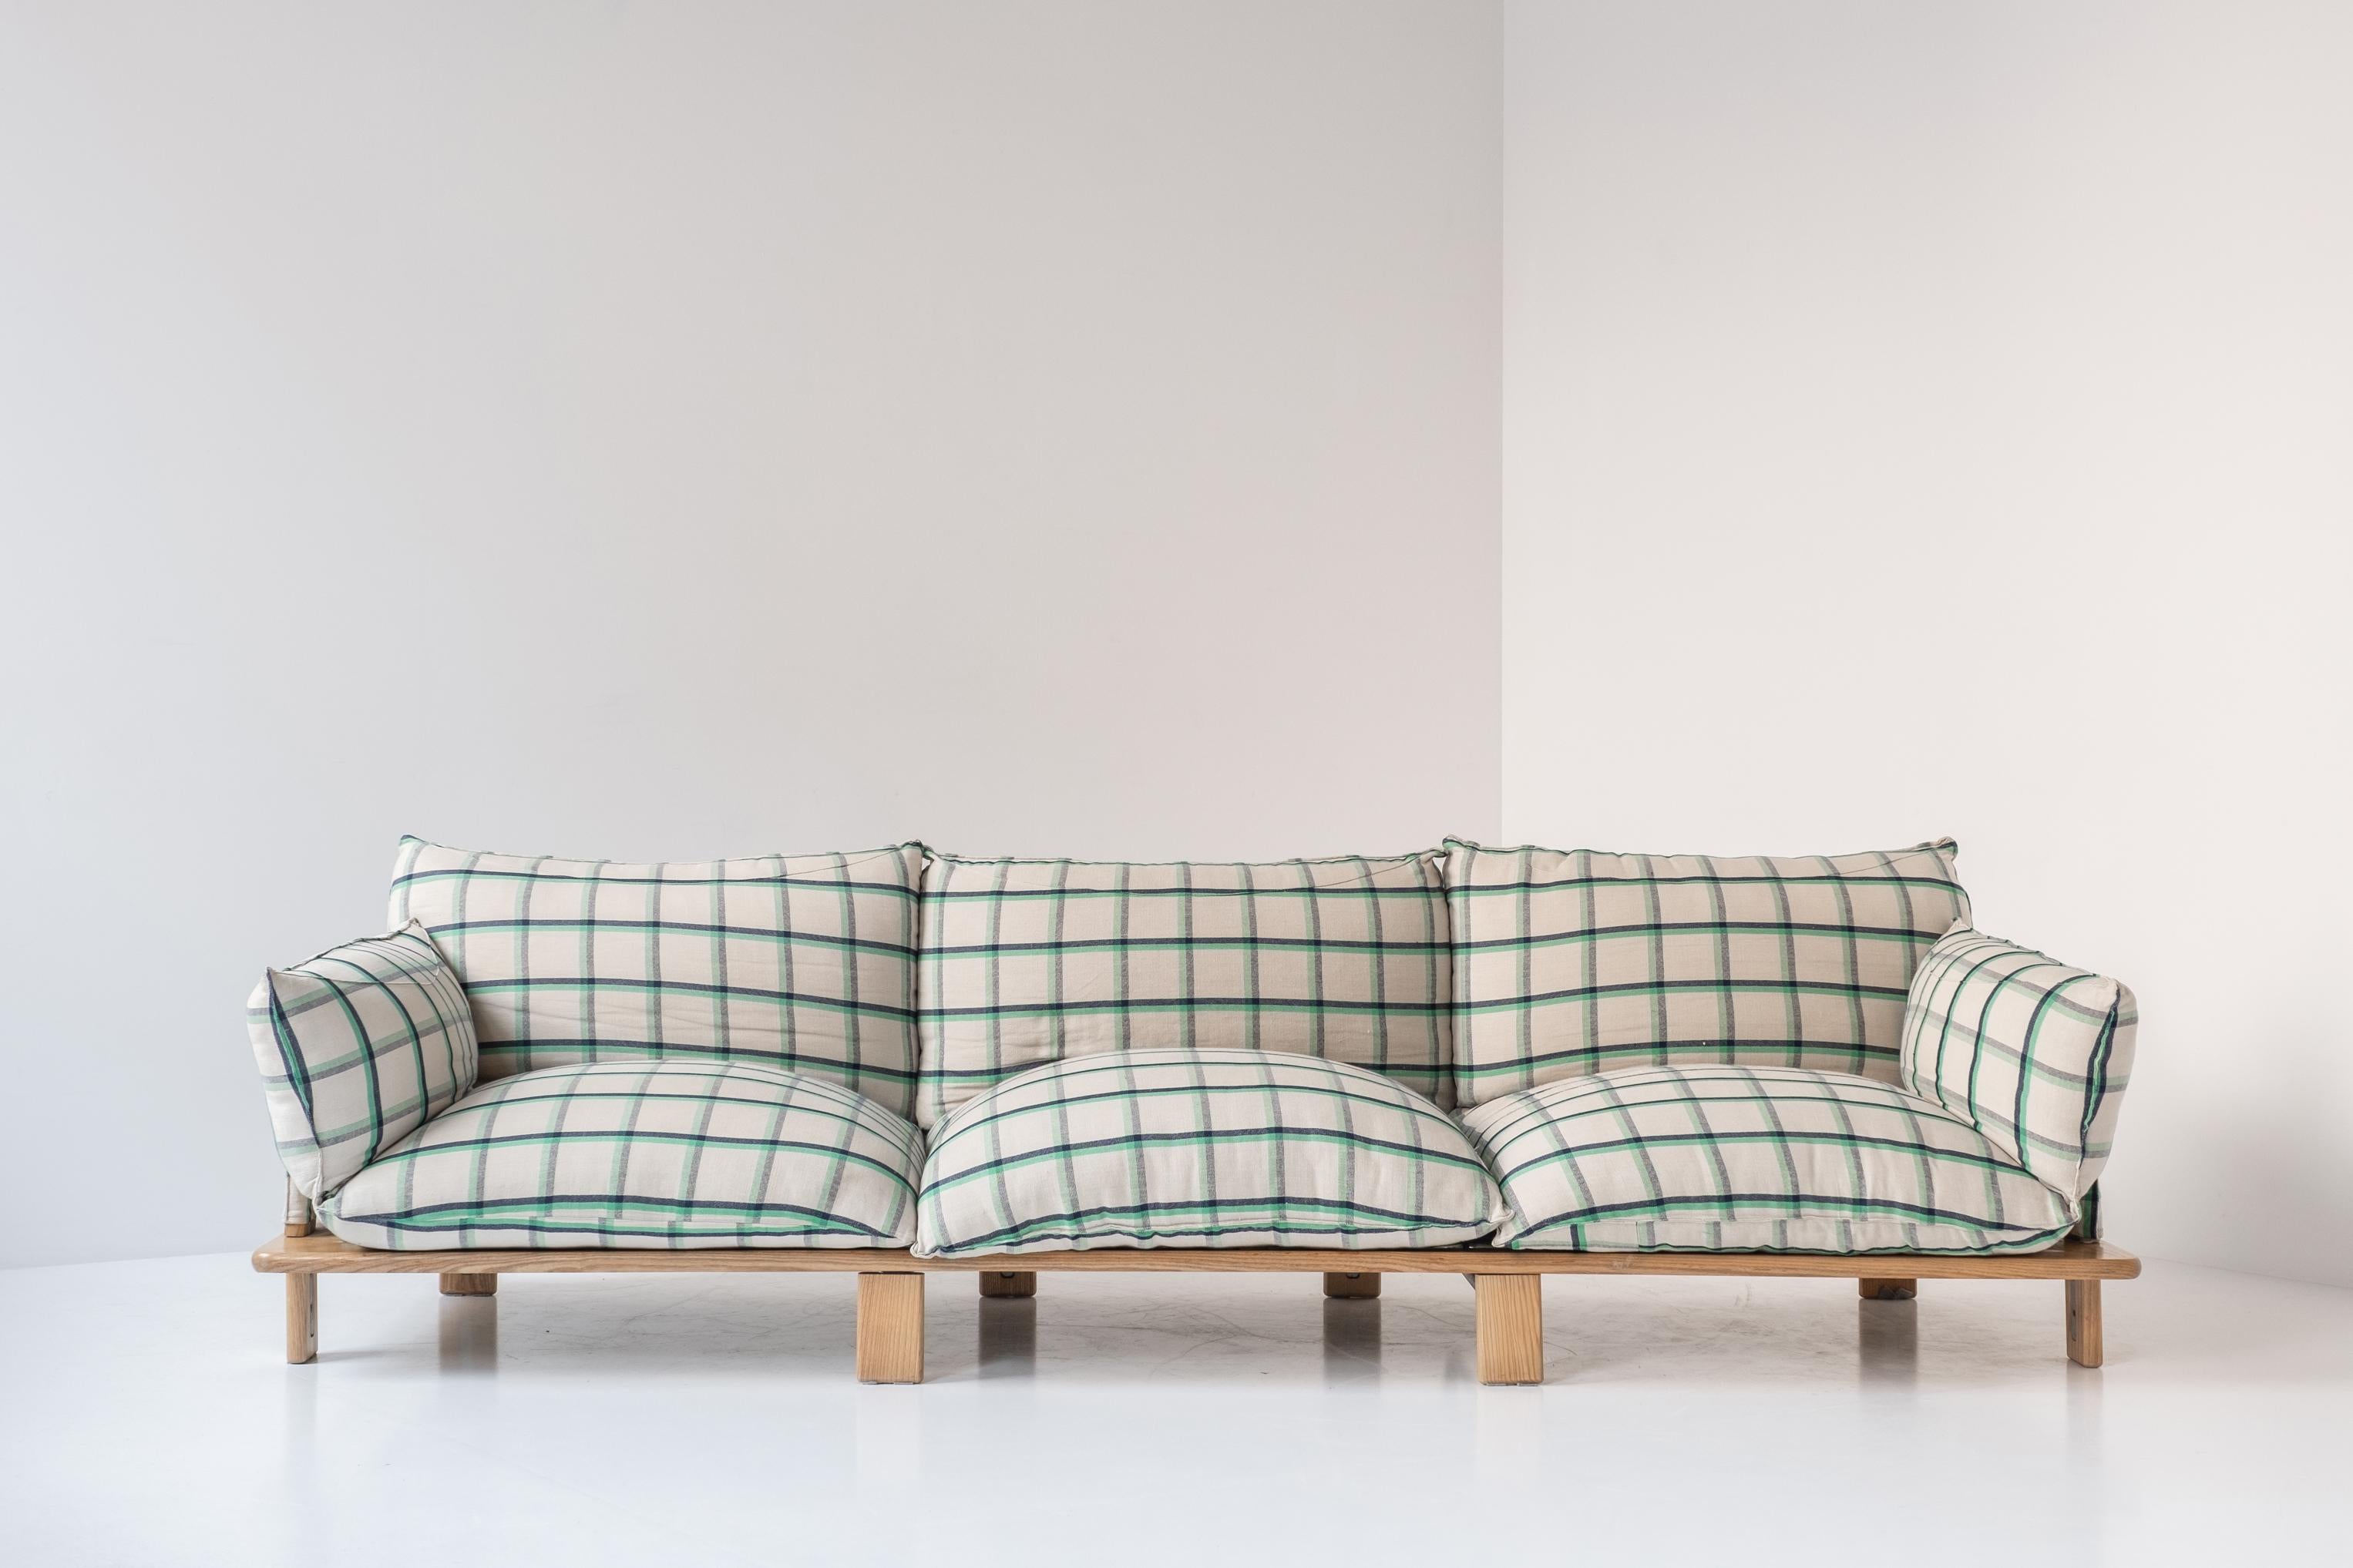 Very rare three seater sofa by Giovanni Offredi for Saportiti, Italy 1970s. This sofa features a frame made out of ash wood and features still the original cotton fabric upholstery. Extremely comfortable sofa in a lovely upholstery. Some visible